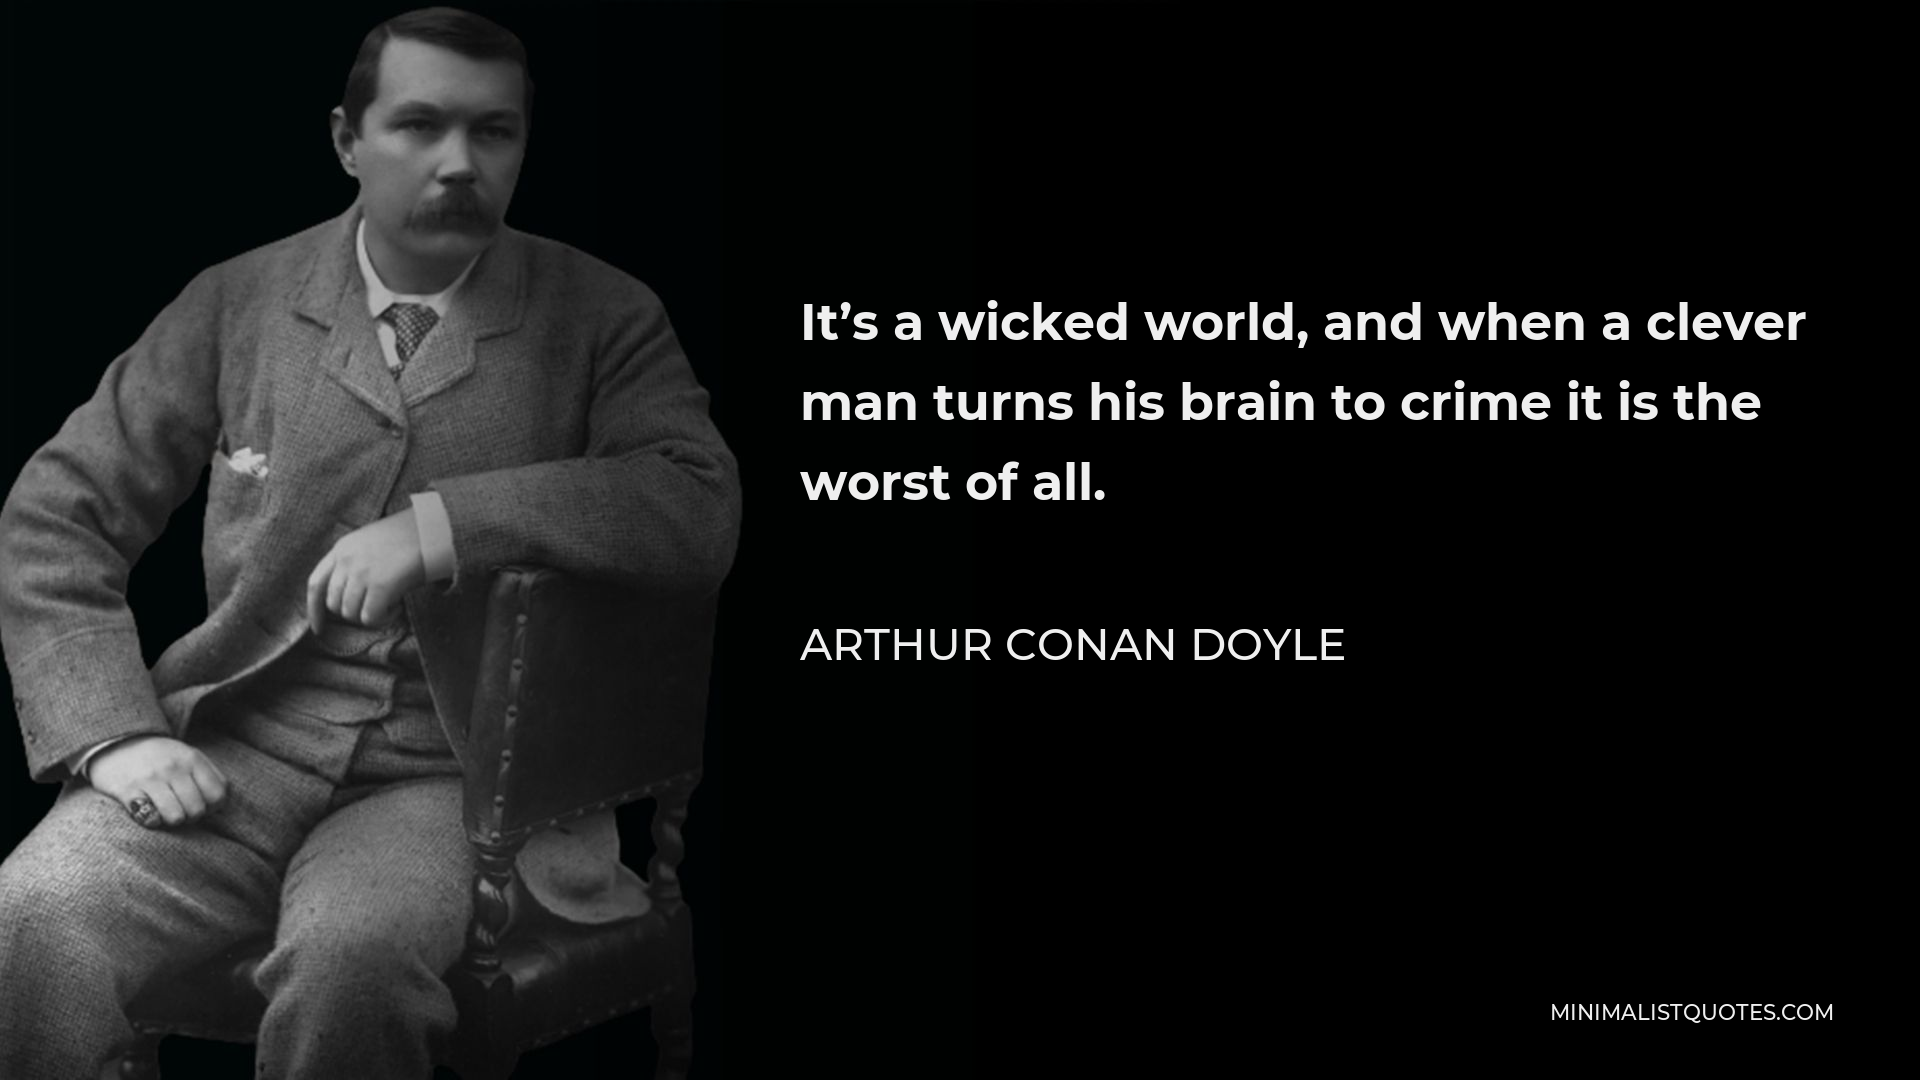 Arthur Conan Doyle Quote - It’s a wicked world, and when a clever man turns his brain to crime it is the worst of all.